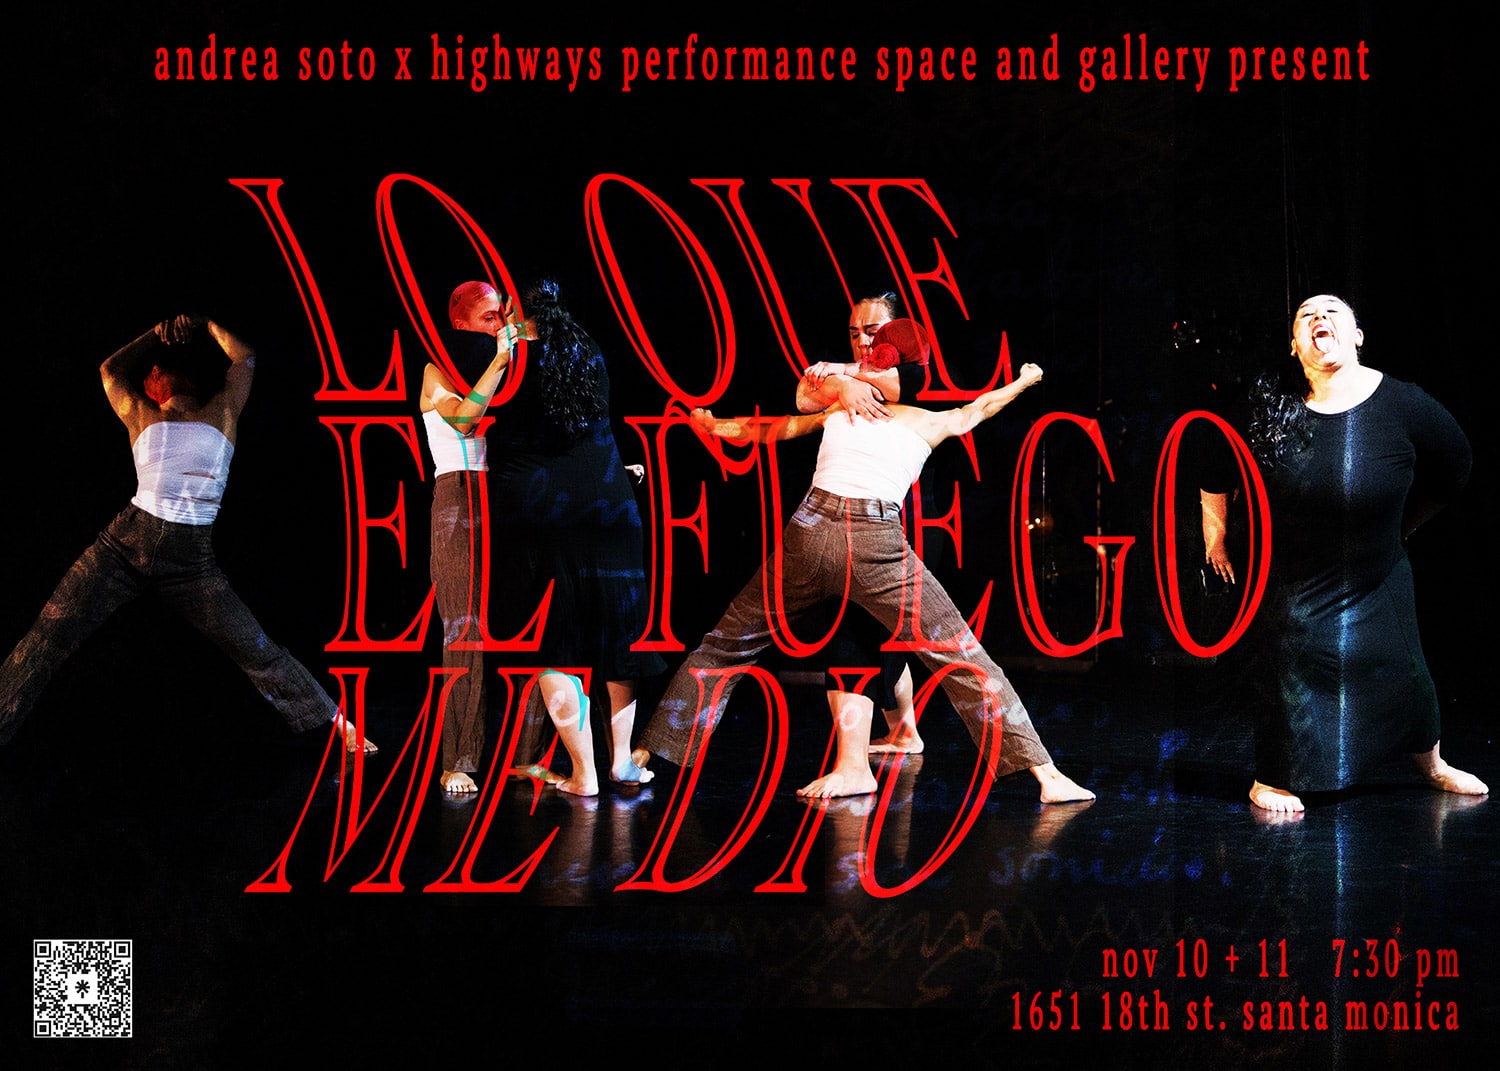 Poster for Andrea Soto's Lo que el fuego me dio. Dancers are seen against a black backdrop with red text.